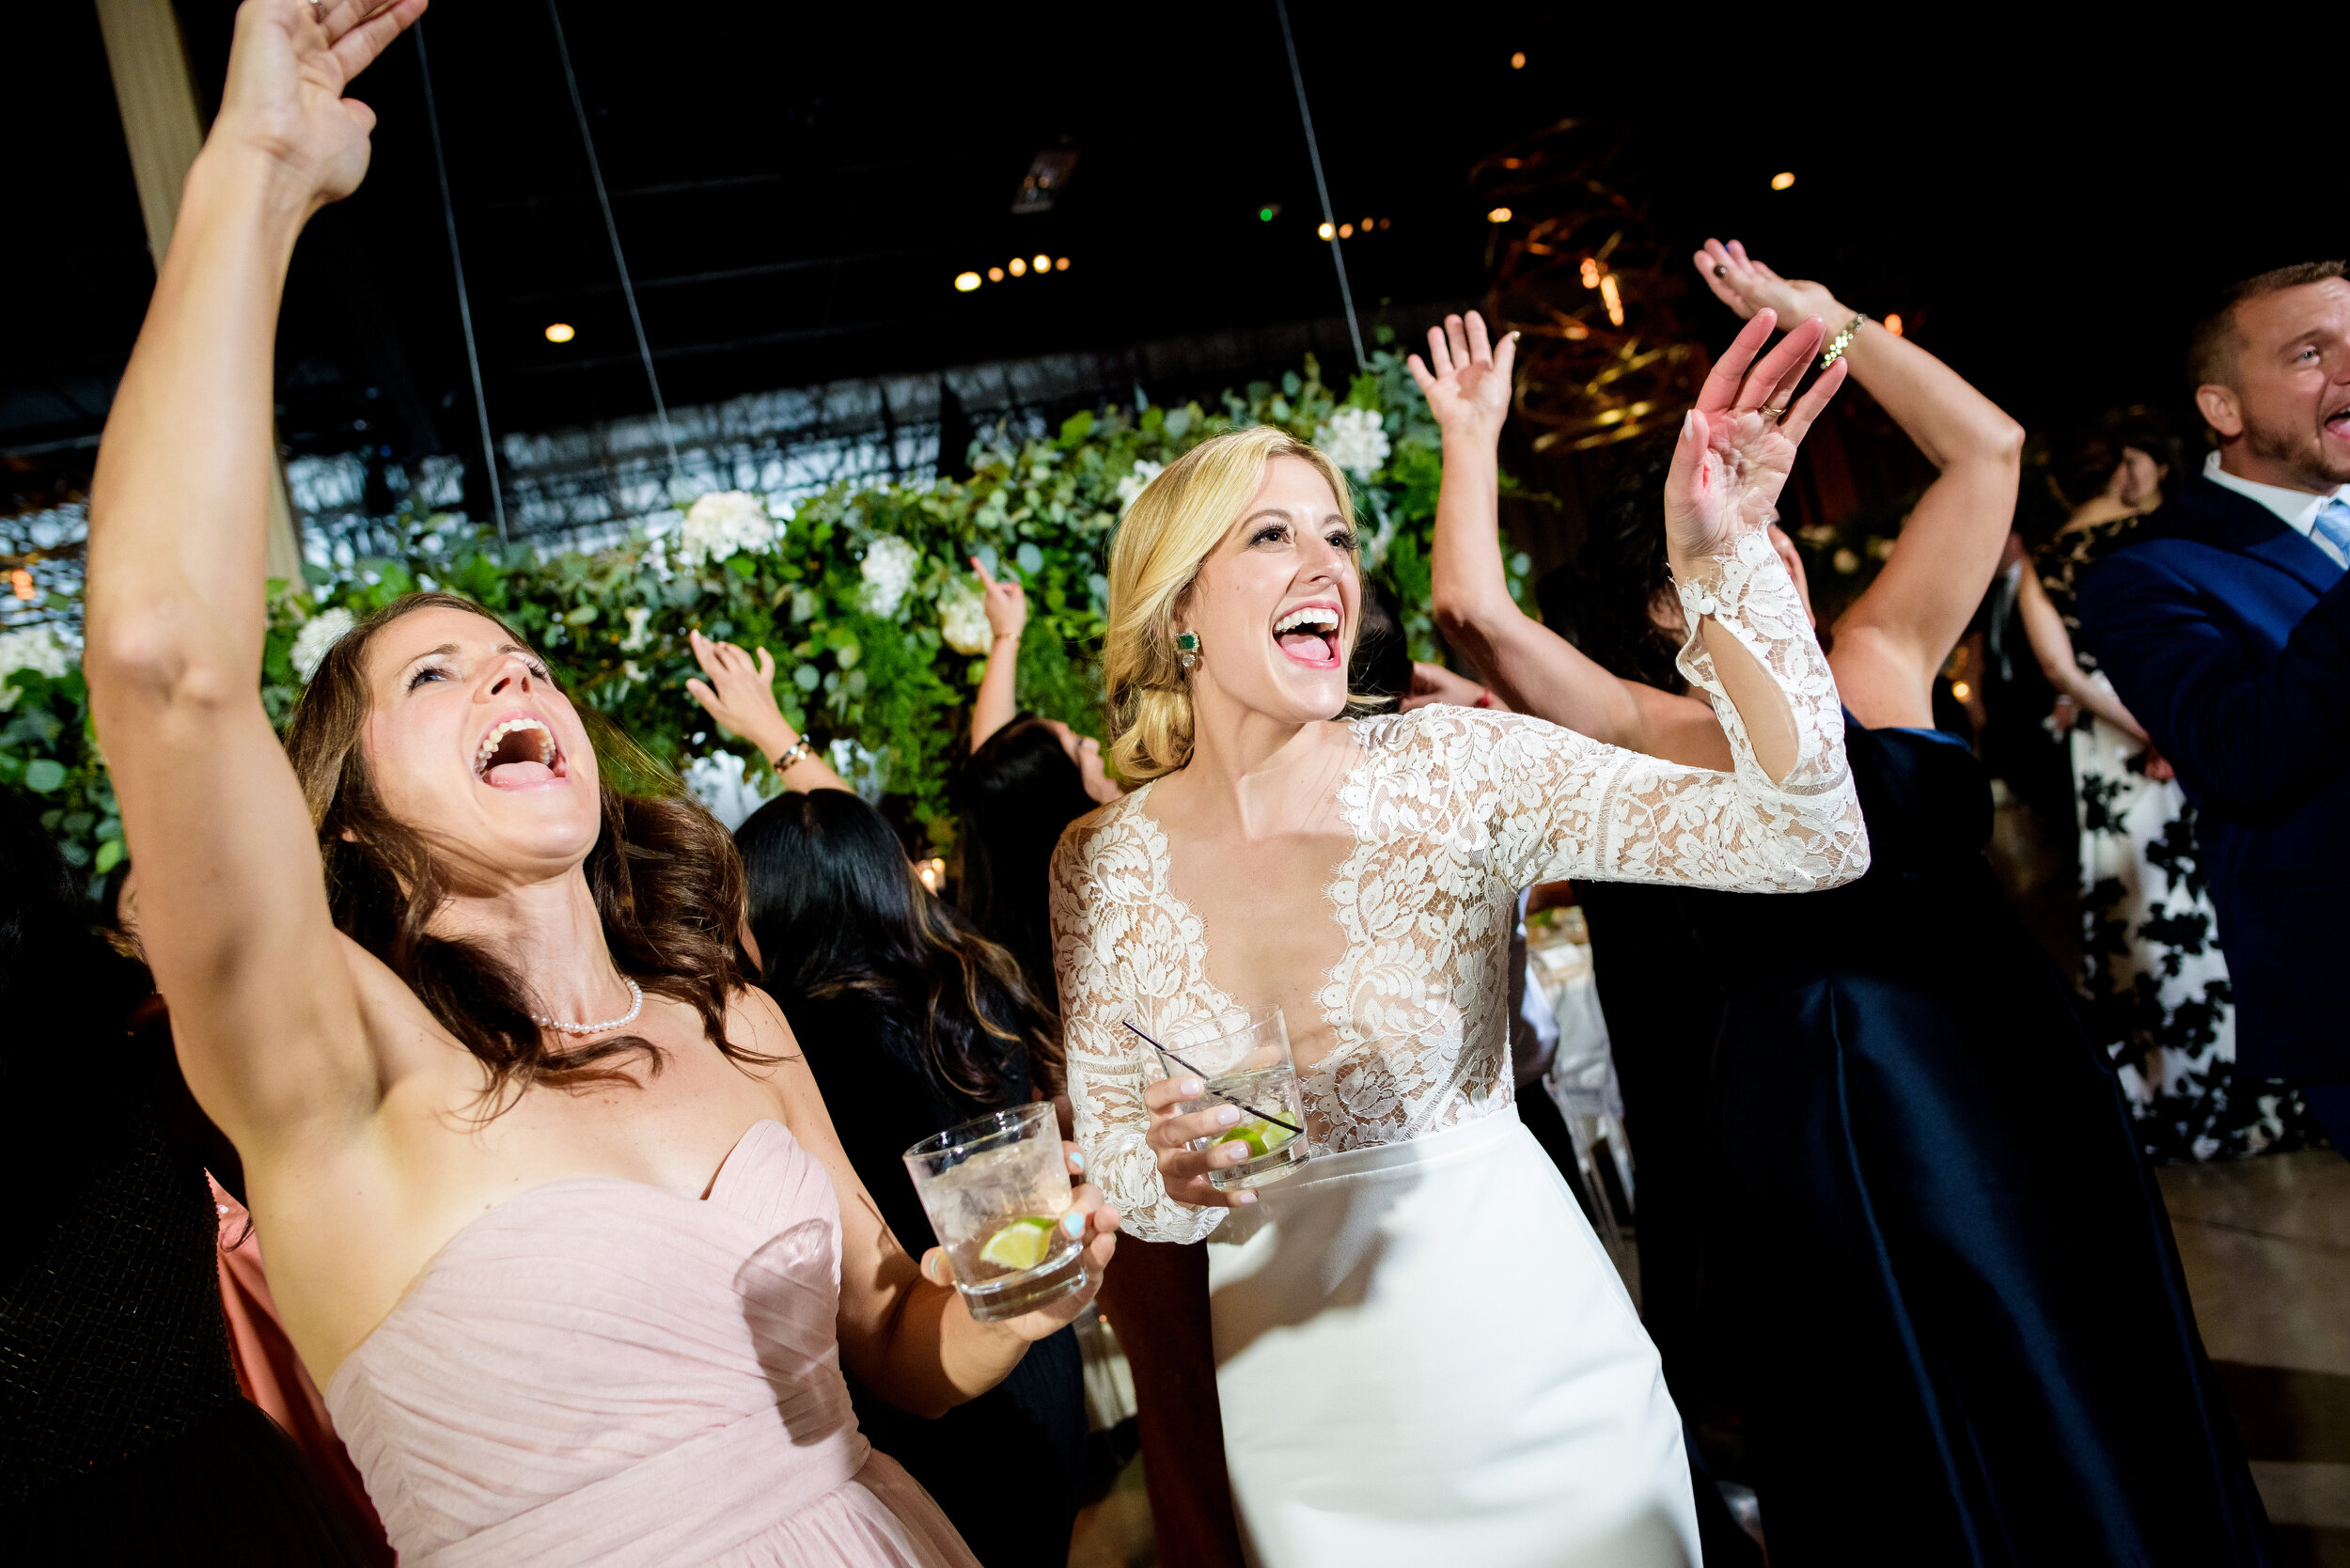 Fun dance floor moment with the bride: Geraghty Chicago wedding photography by J. Brown Photography.